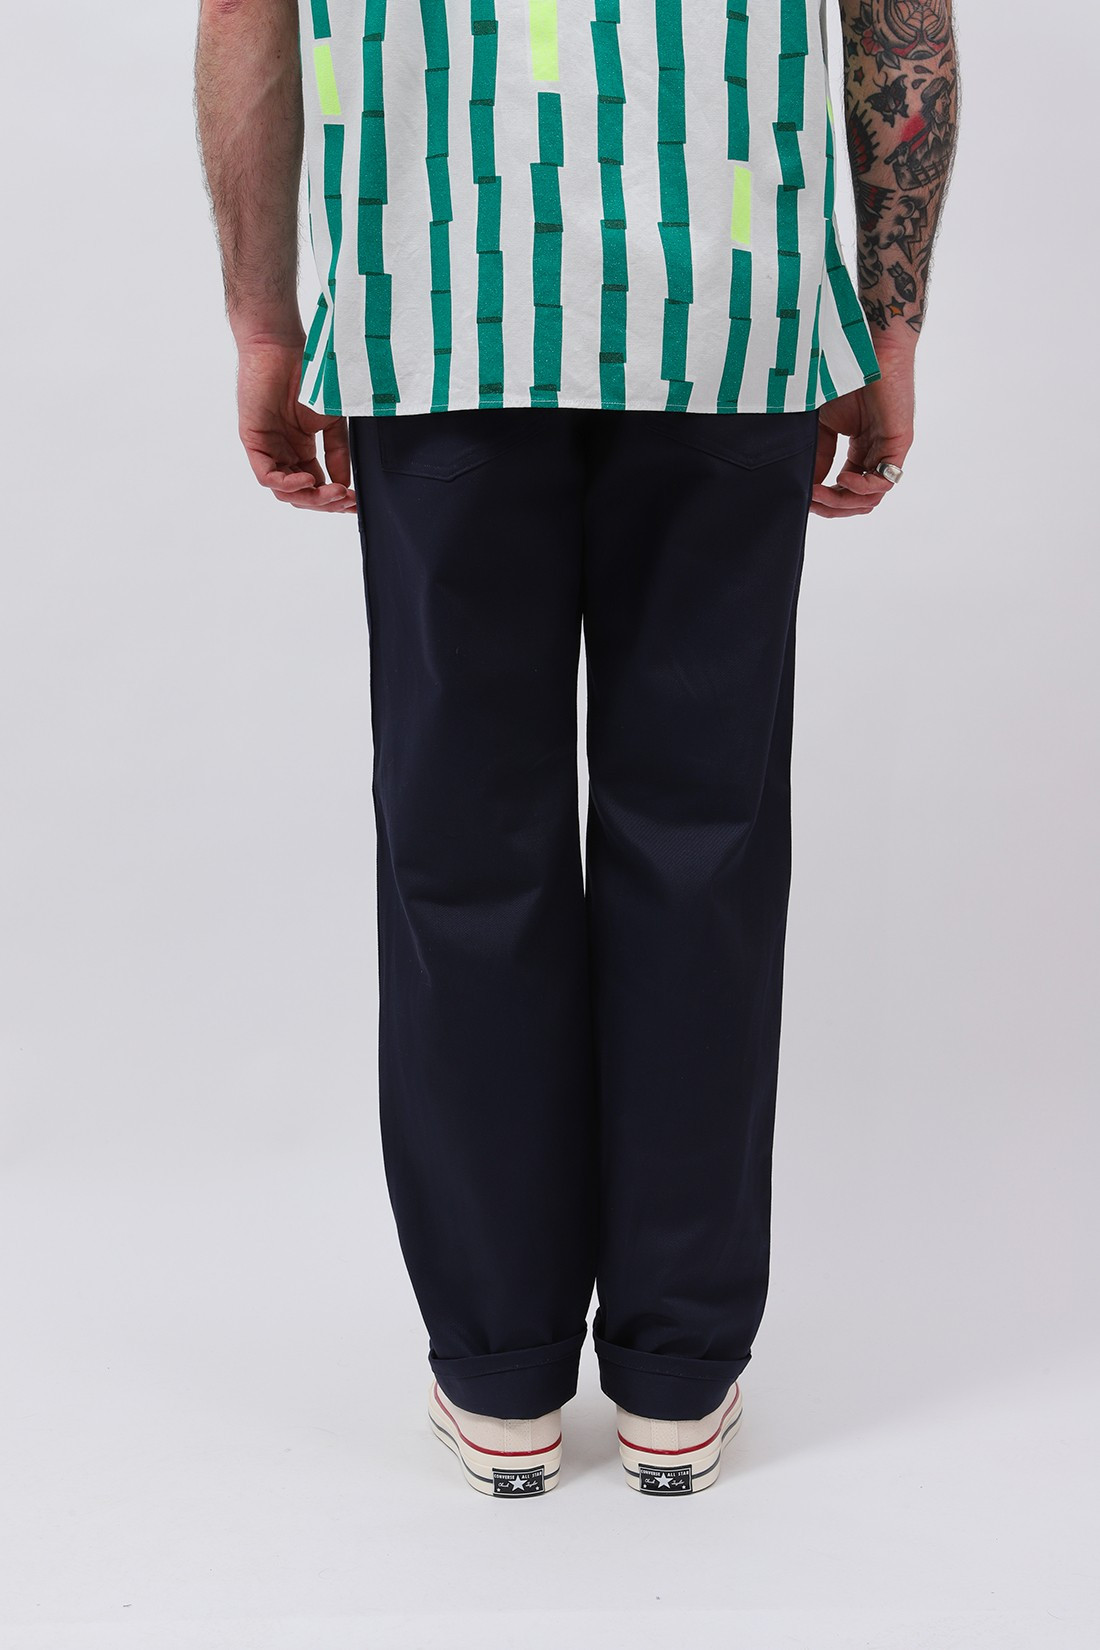 STAN RAY / Taper fatigue pant Navy